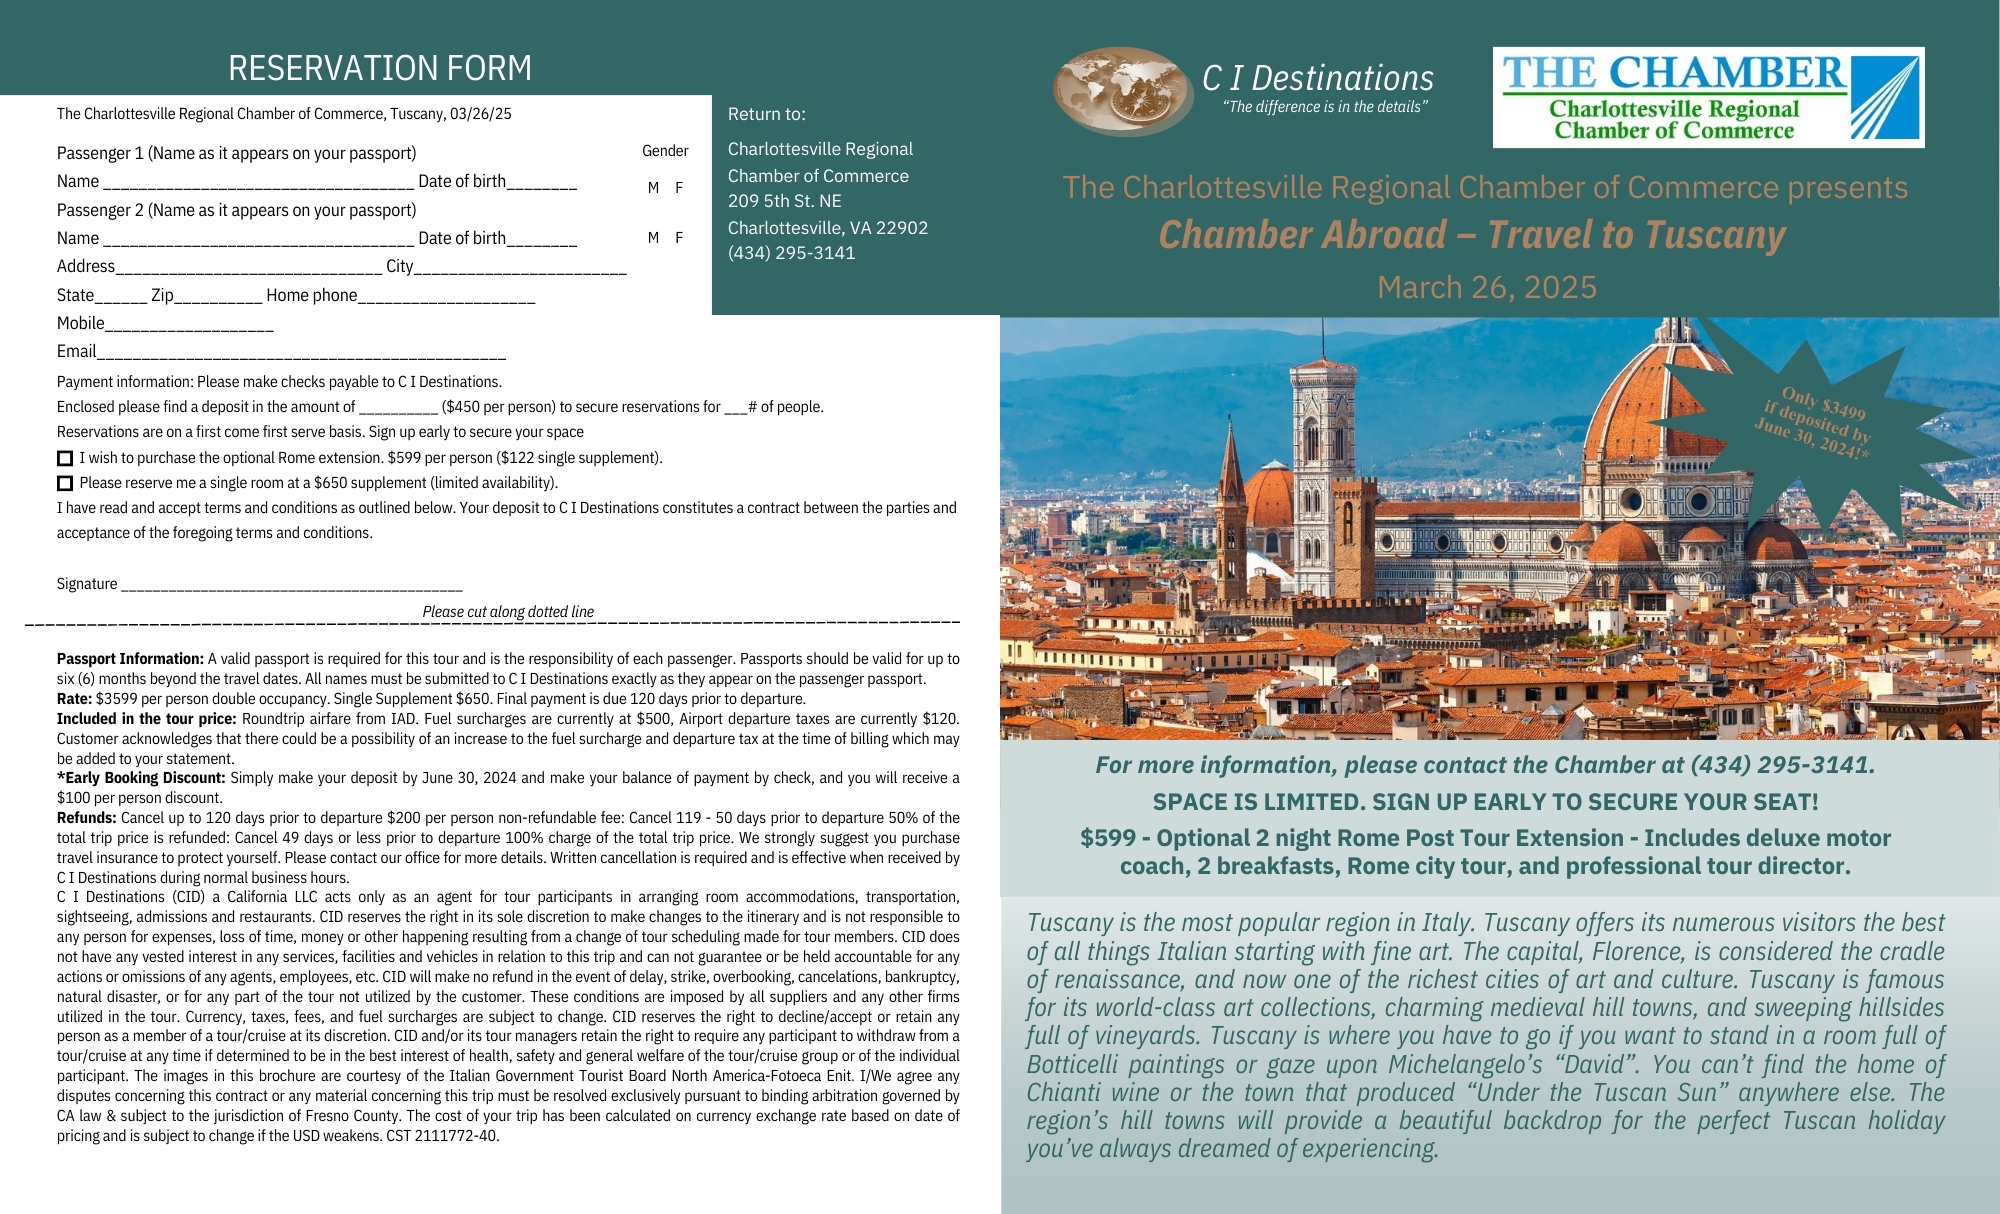 Chamber Abroad 2025 Tuscany Reservation p1